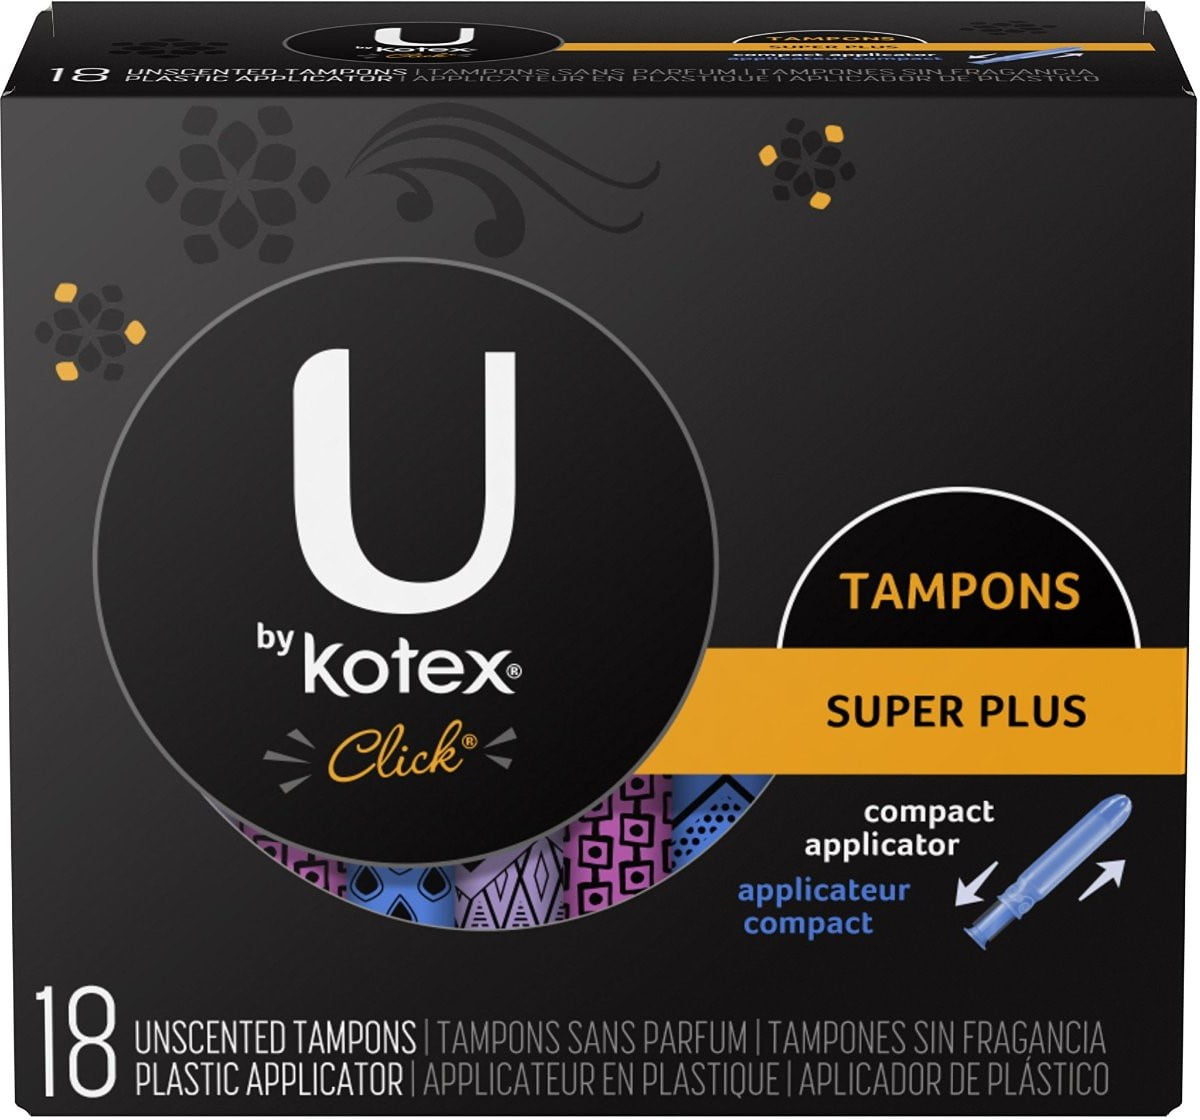 U by Kotex Click Compact Tampons, Regular Absorbency, Unscented, 192 Count  (6 Packs of 32) (Packaging May Vary) - Walmart.com